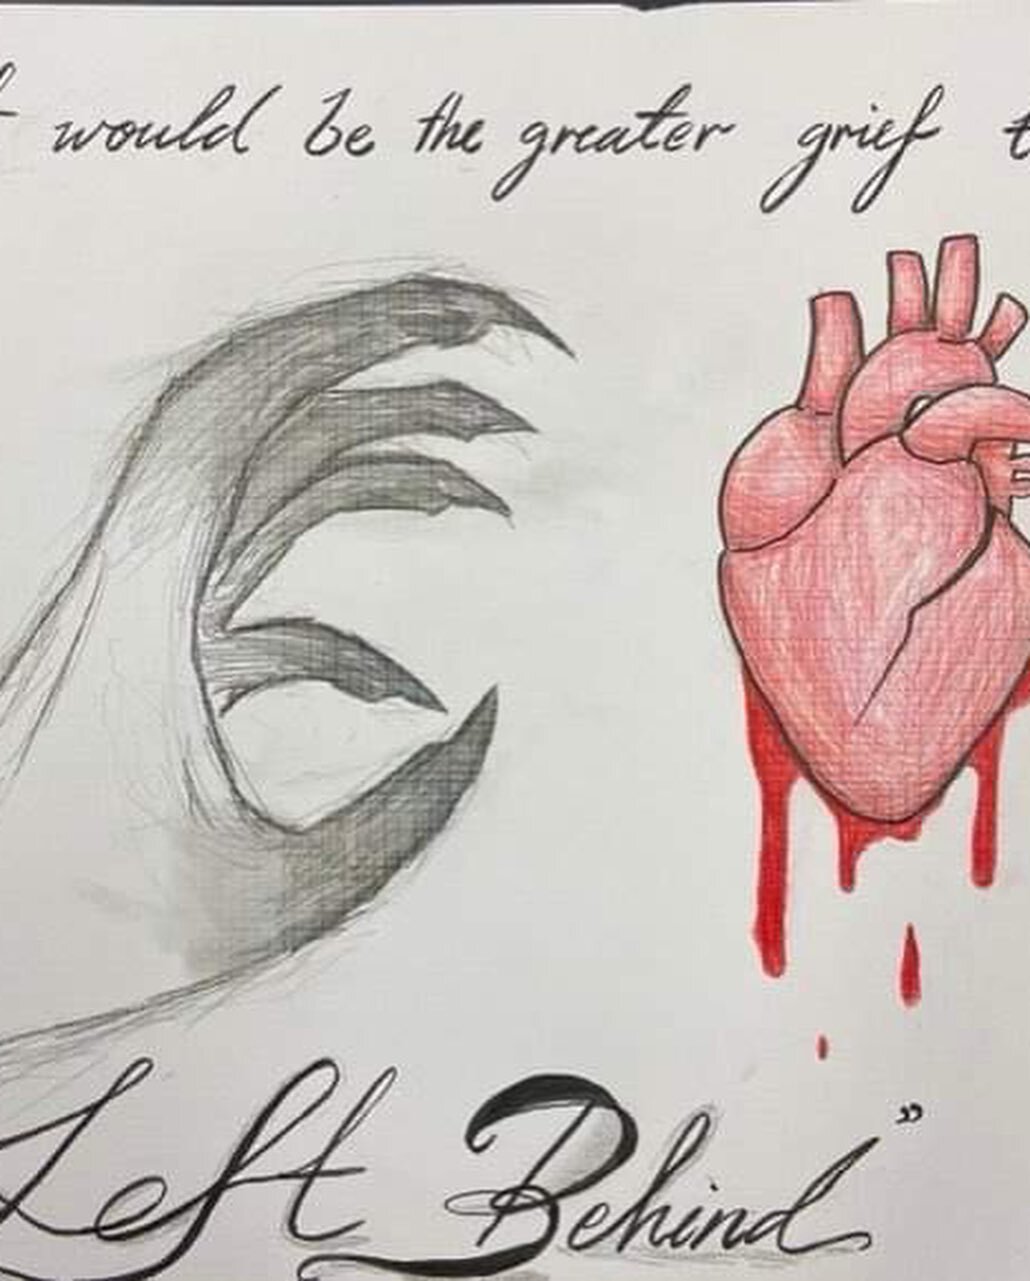 Today, Year 10 English created visualizations of &lsquo;love&rsquo; and &lsquo;tragedy&rsquo; in their introductory lesson for their film study of Baz Luhrmann&rsquo;s Romeo and Juliet. #creativity